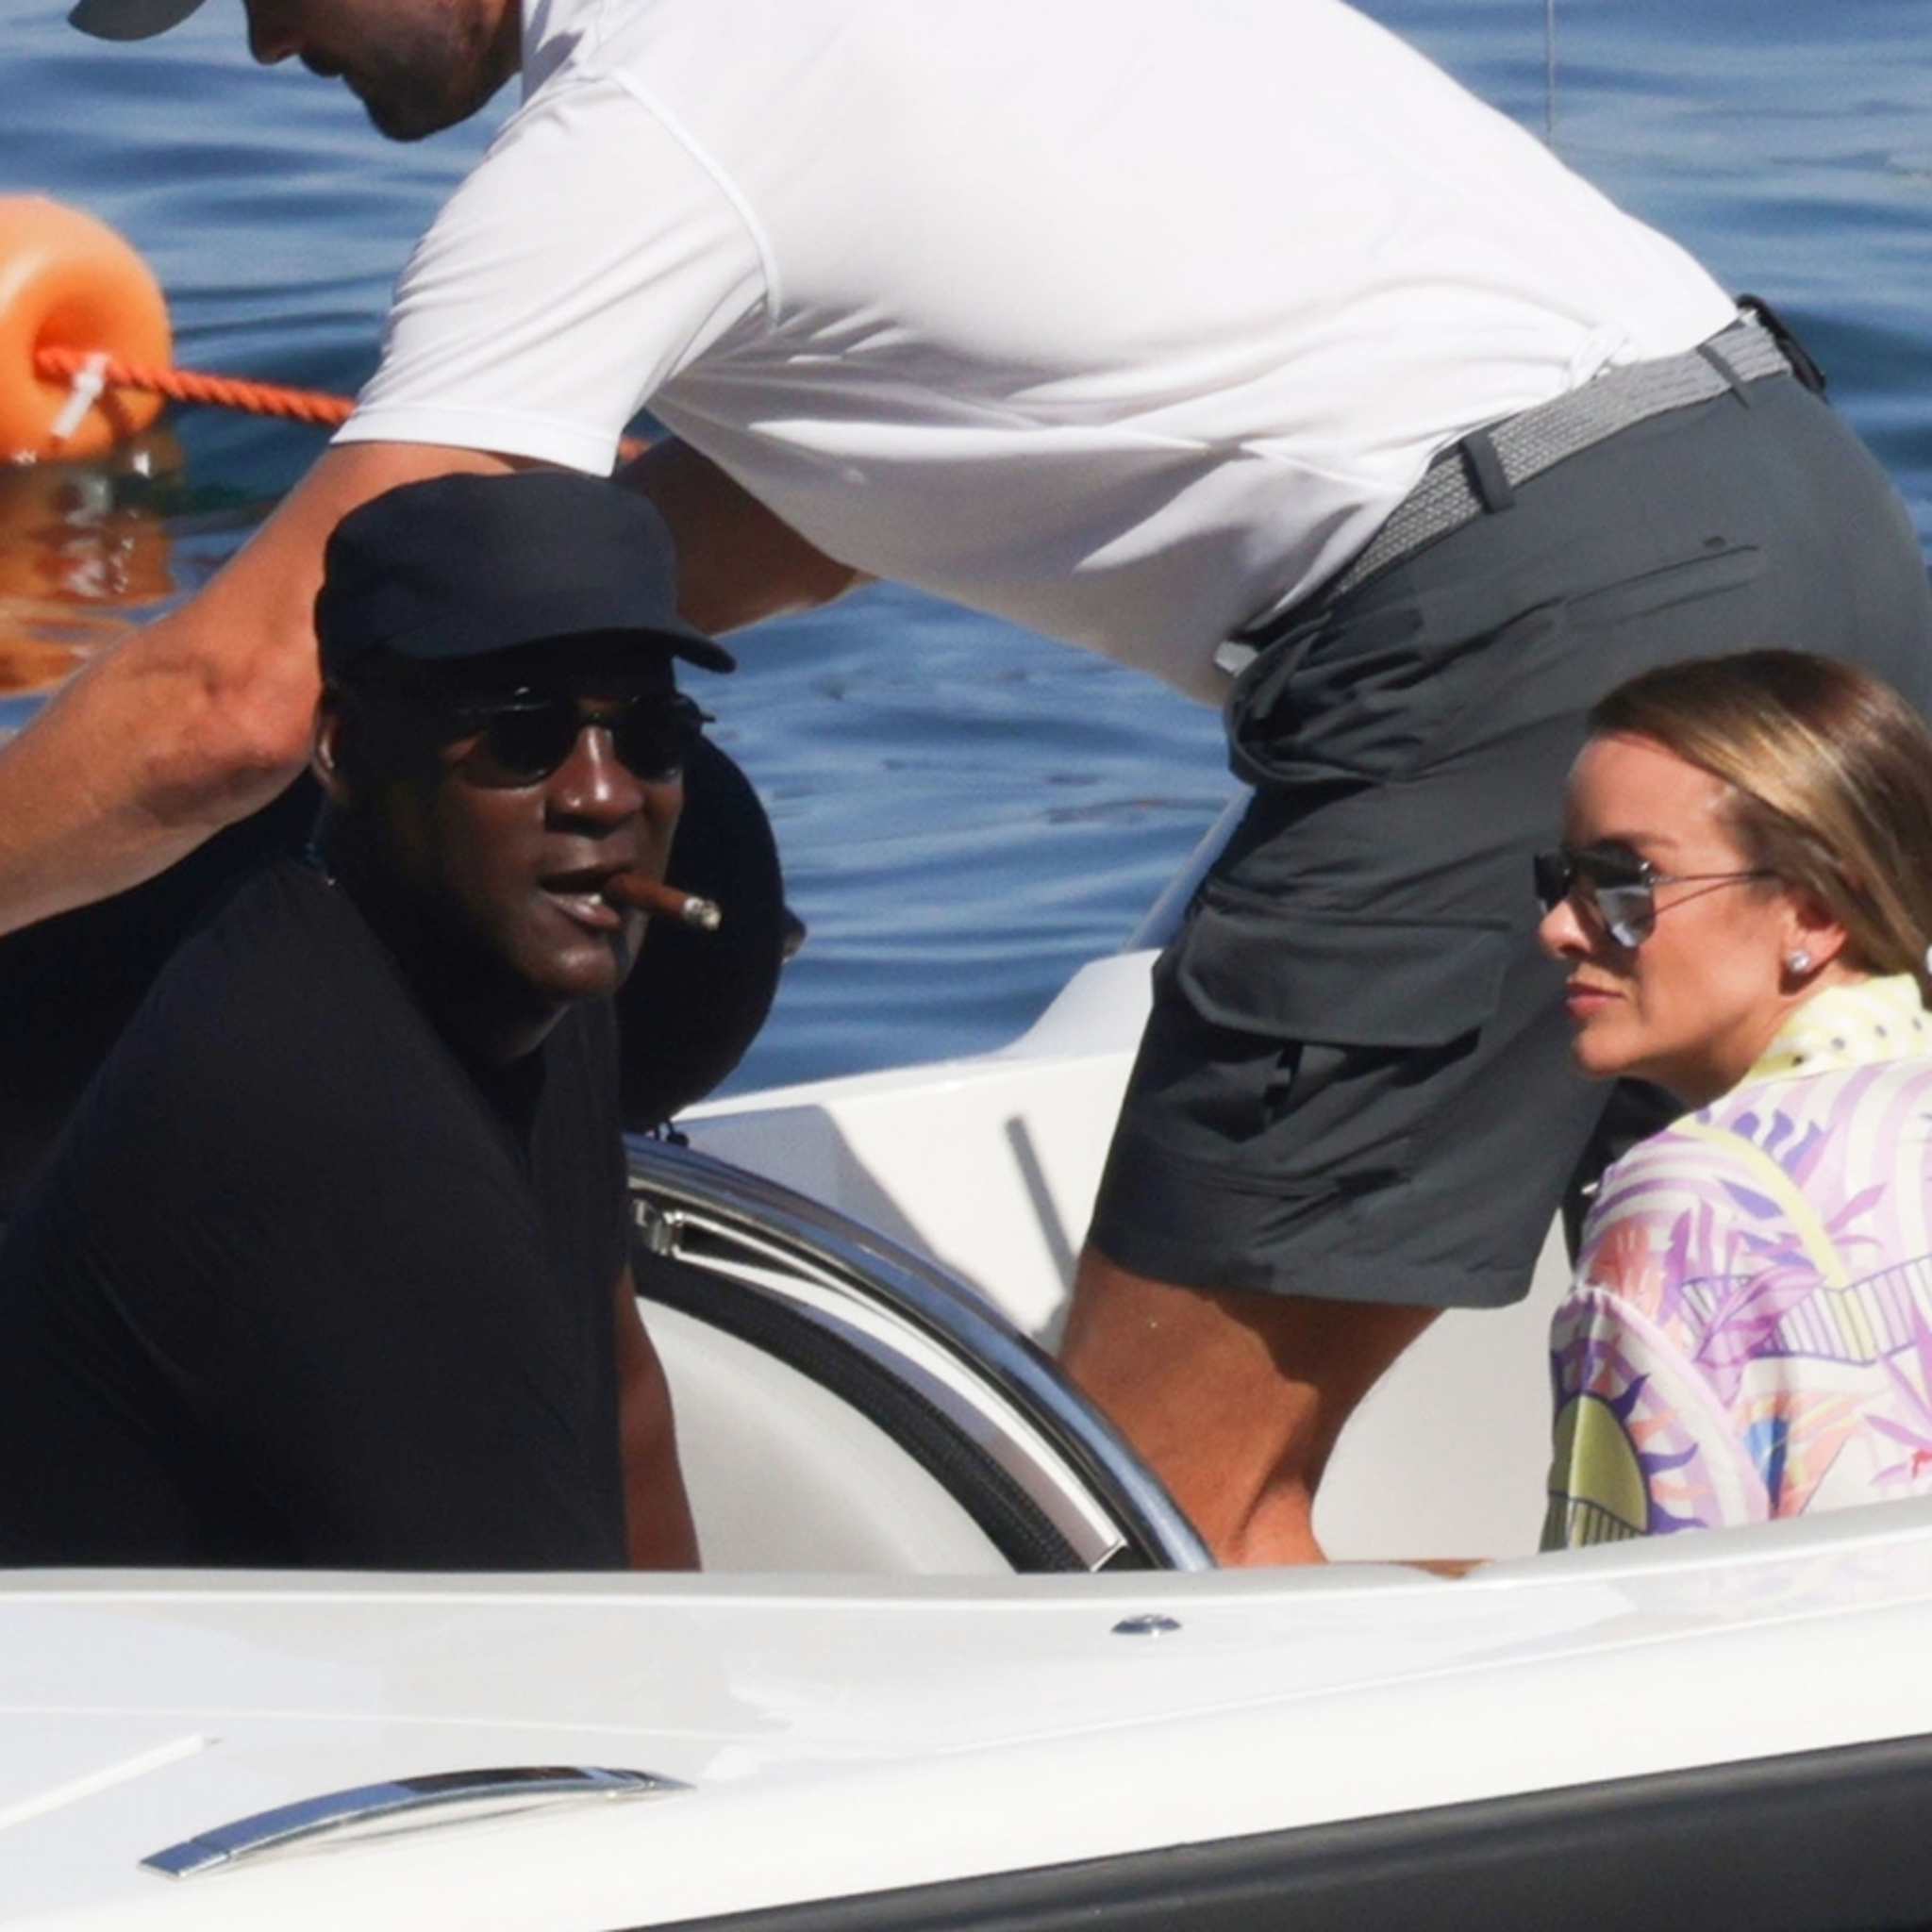 Forge nedbrydes midtergang Michael Jordan Puffs Cigar On Boat In Italy, Carefree After 'Traumatizing'  Larsa